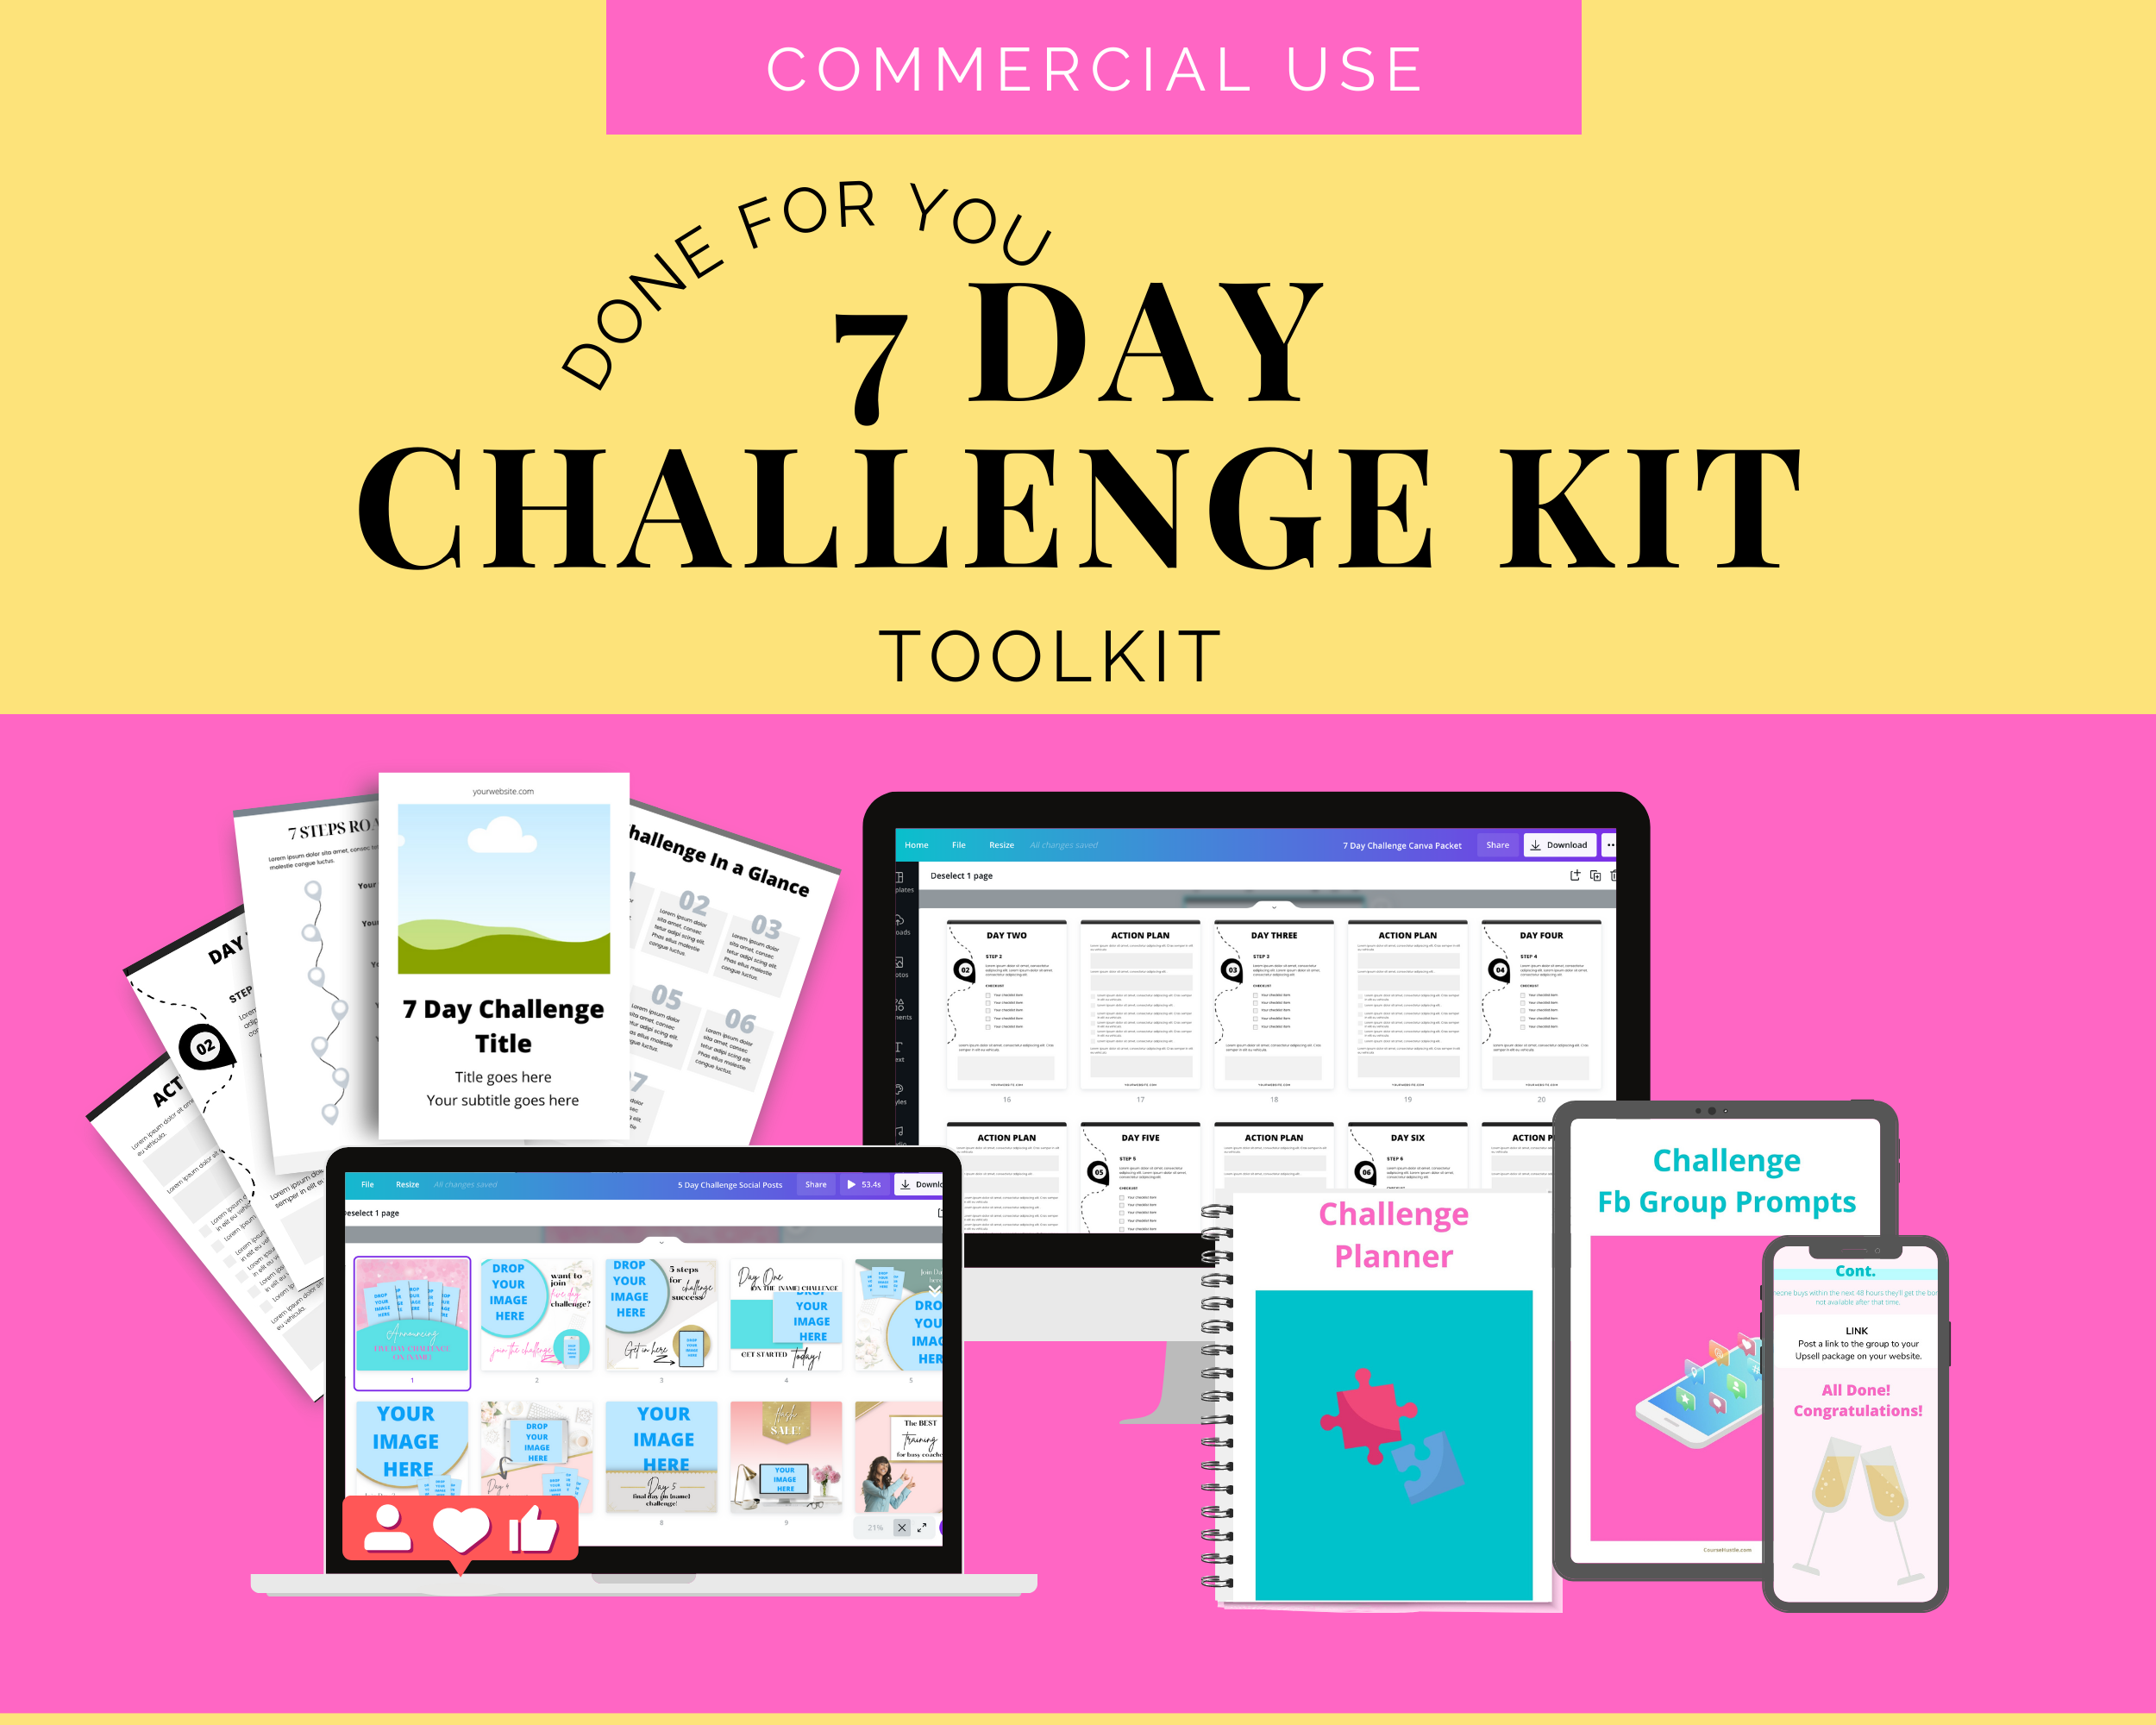 7 Day Challenge | Irresistible Online Challenge | Email Sequences | Facebook Ad Graphics